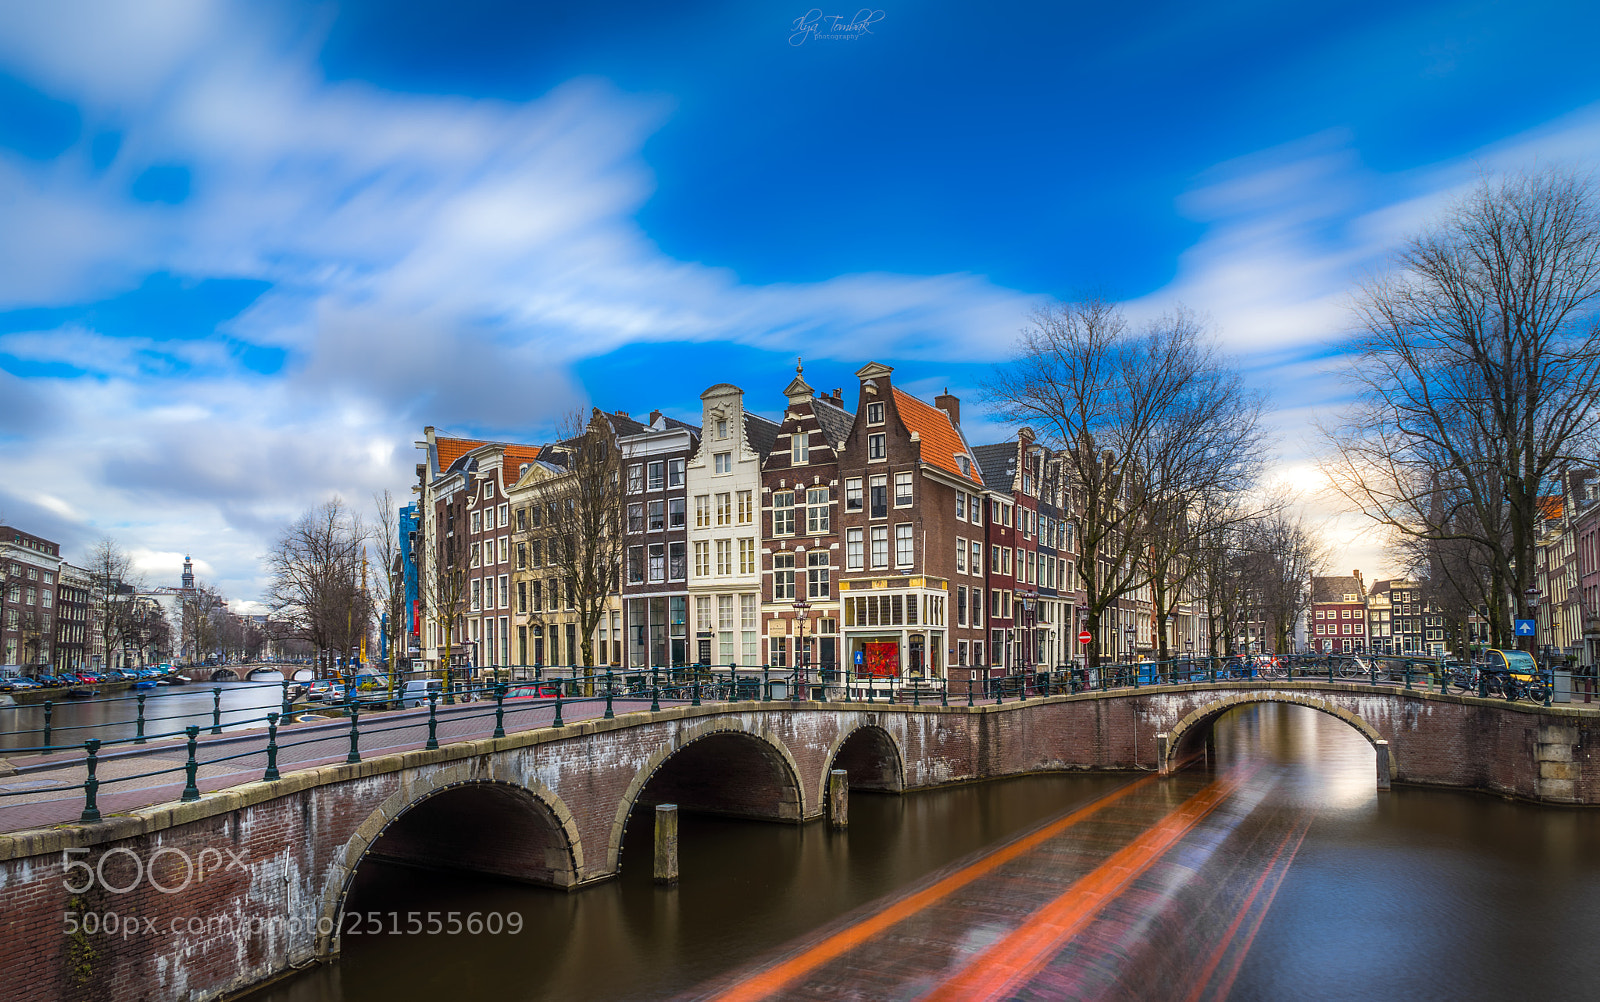 Sony a7 II sample photo. Amsterdam day photography